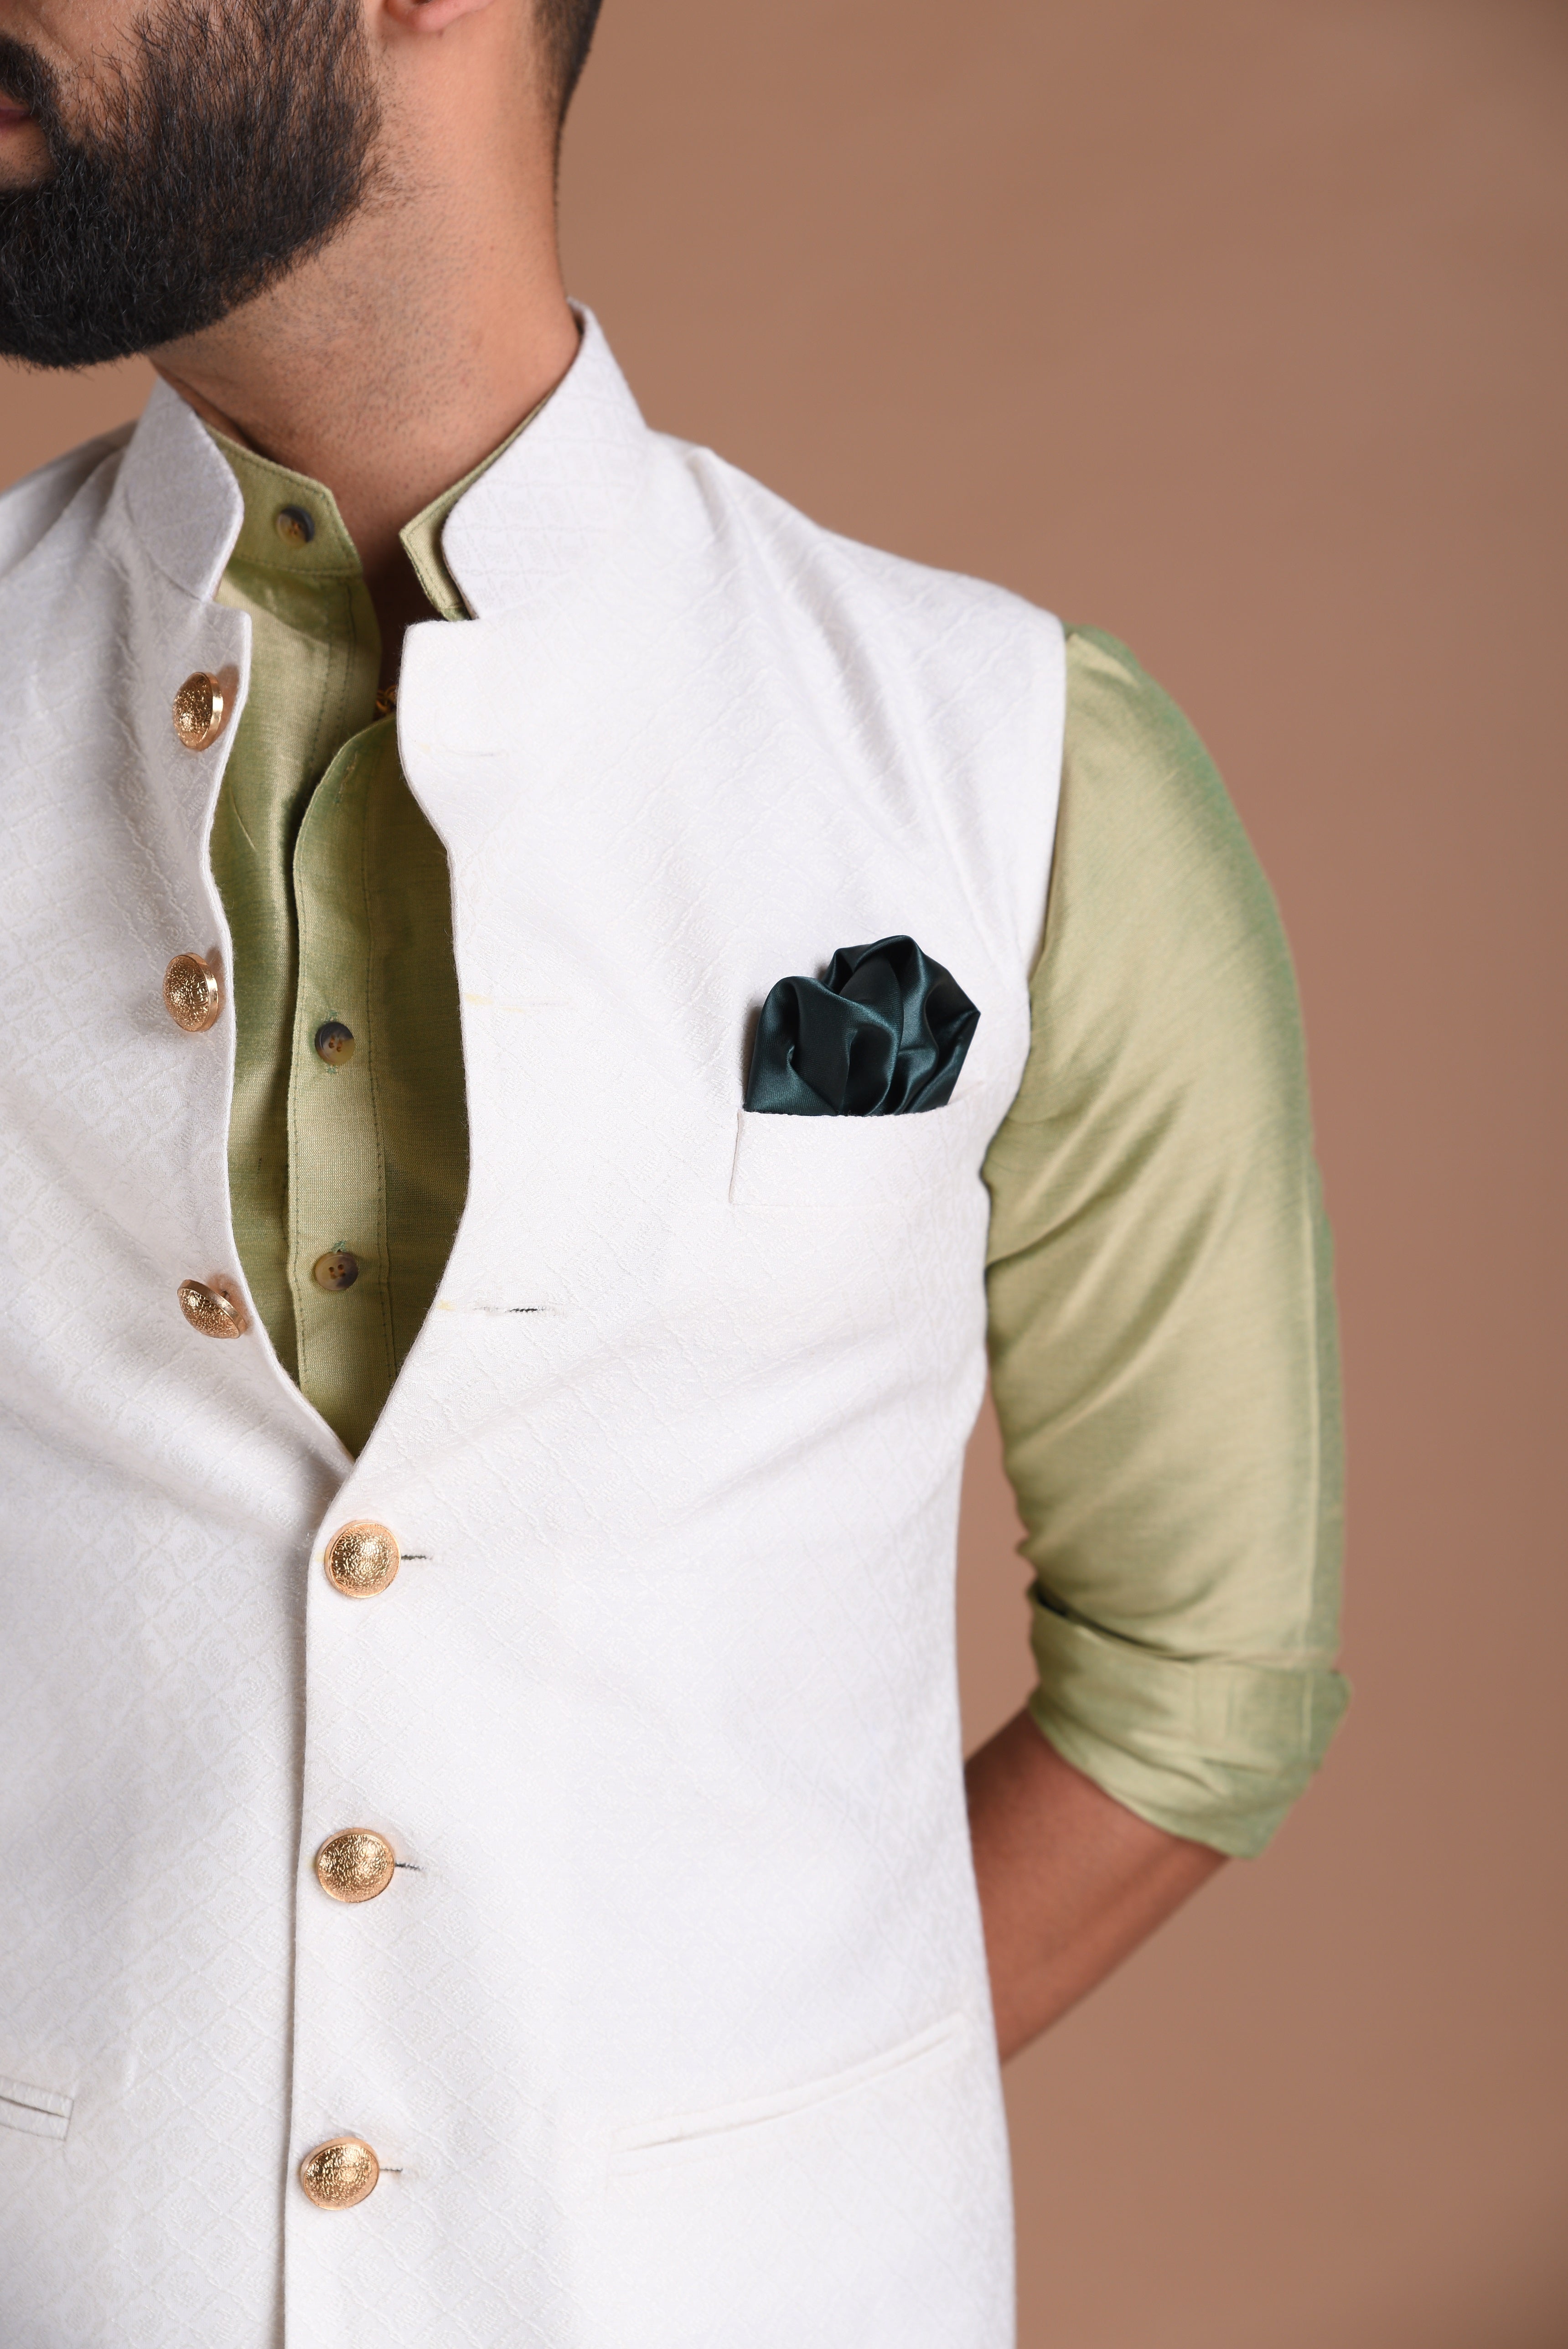 Dazzling White Jaquard Nehru Modi Jacket With Silk Kurta Pajama Set| Available in Father Son Combo | Traditional Indian Wedding / Festival|